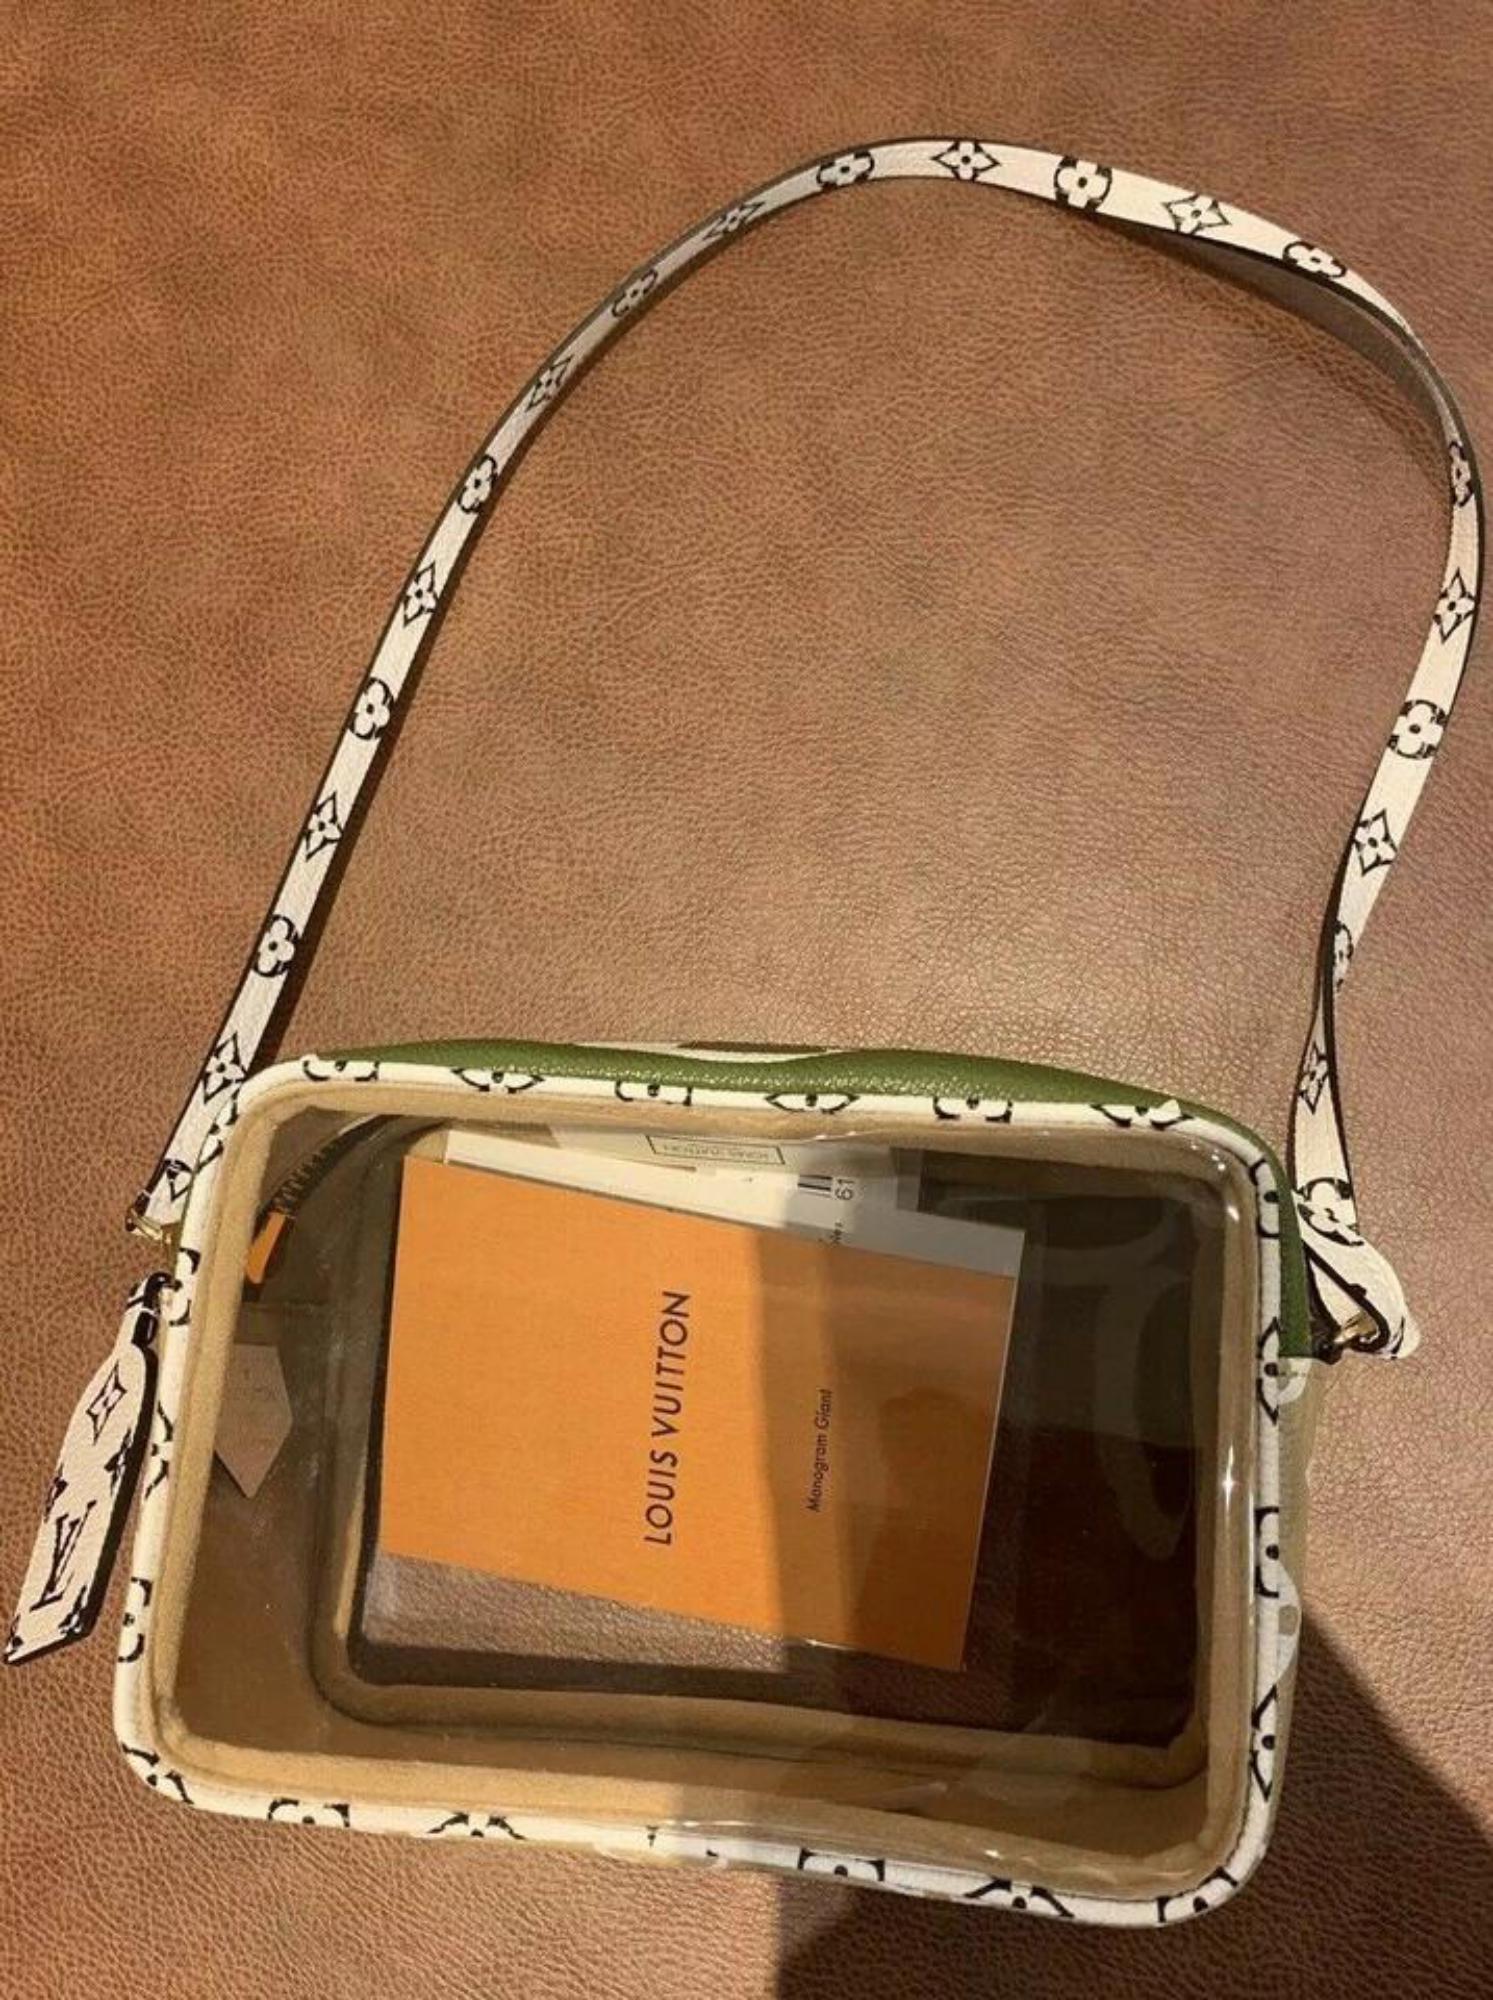 Louis Vuitton Translucent Ss19 Giants Beach Pouch Camera 870432 Shoulder Bag In New Condition For Sale In Forest Hills, NY